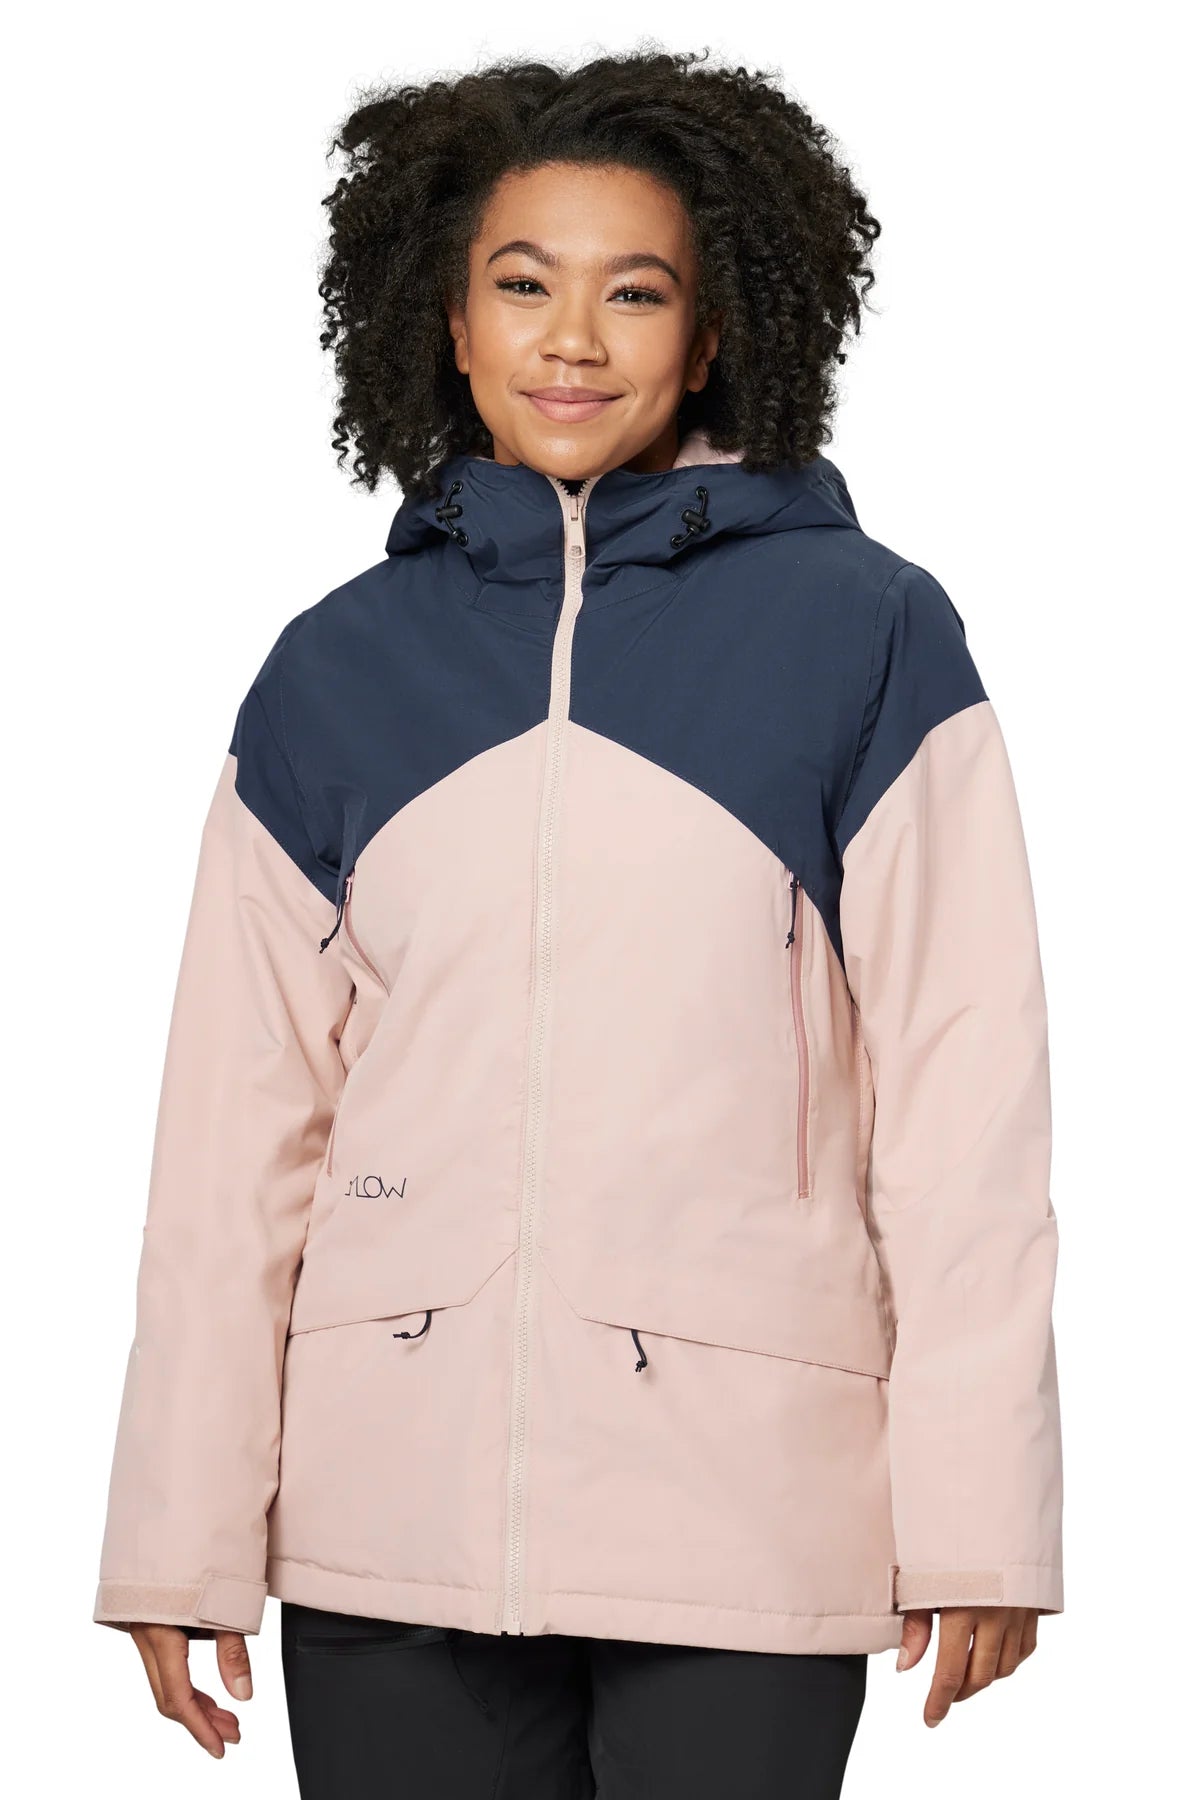 Women's Ski and Snowboard Clothing